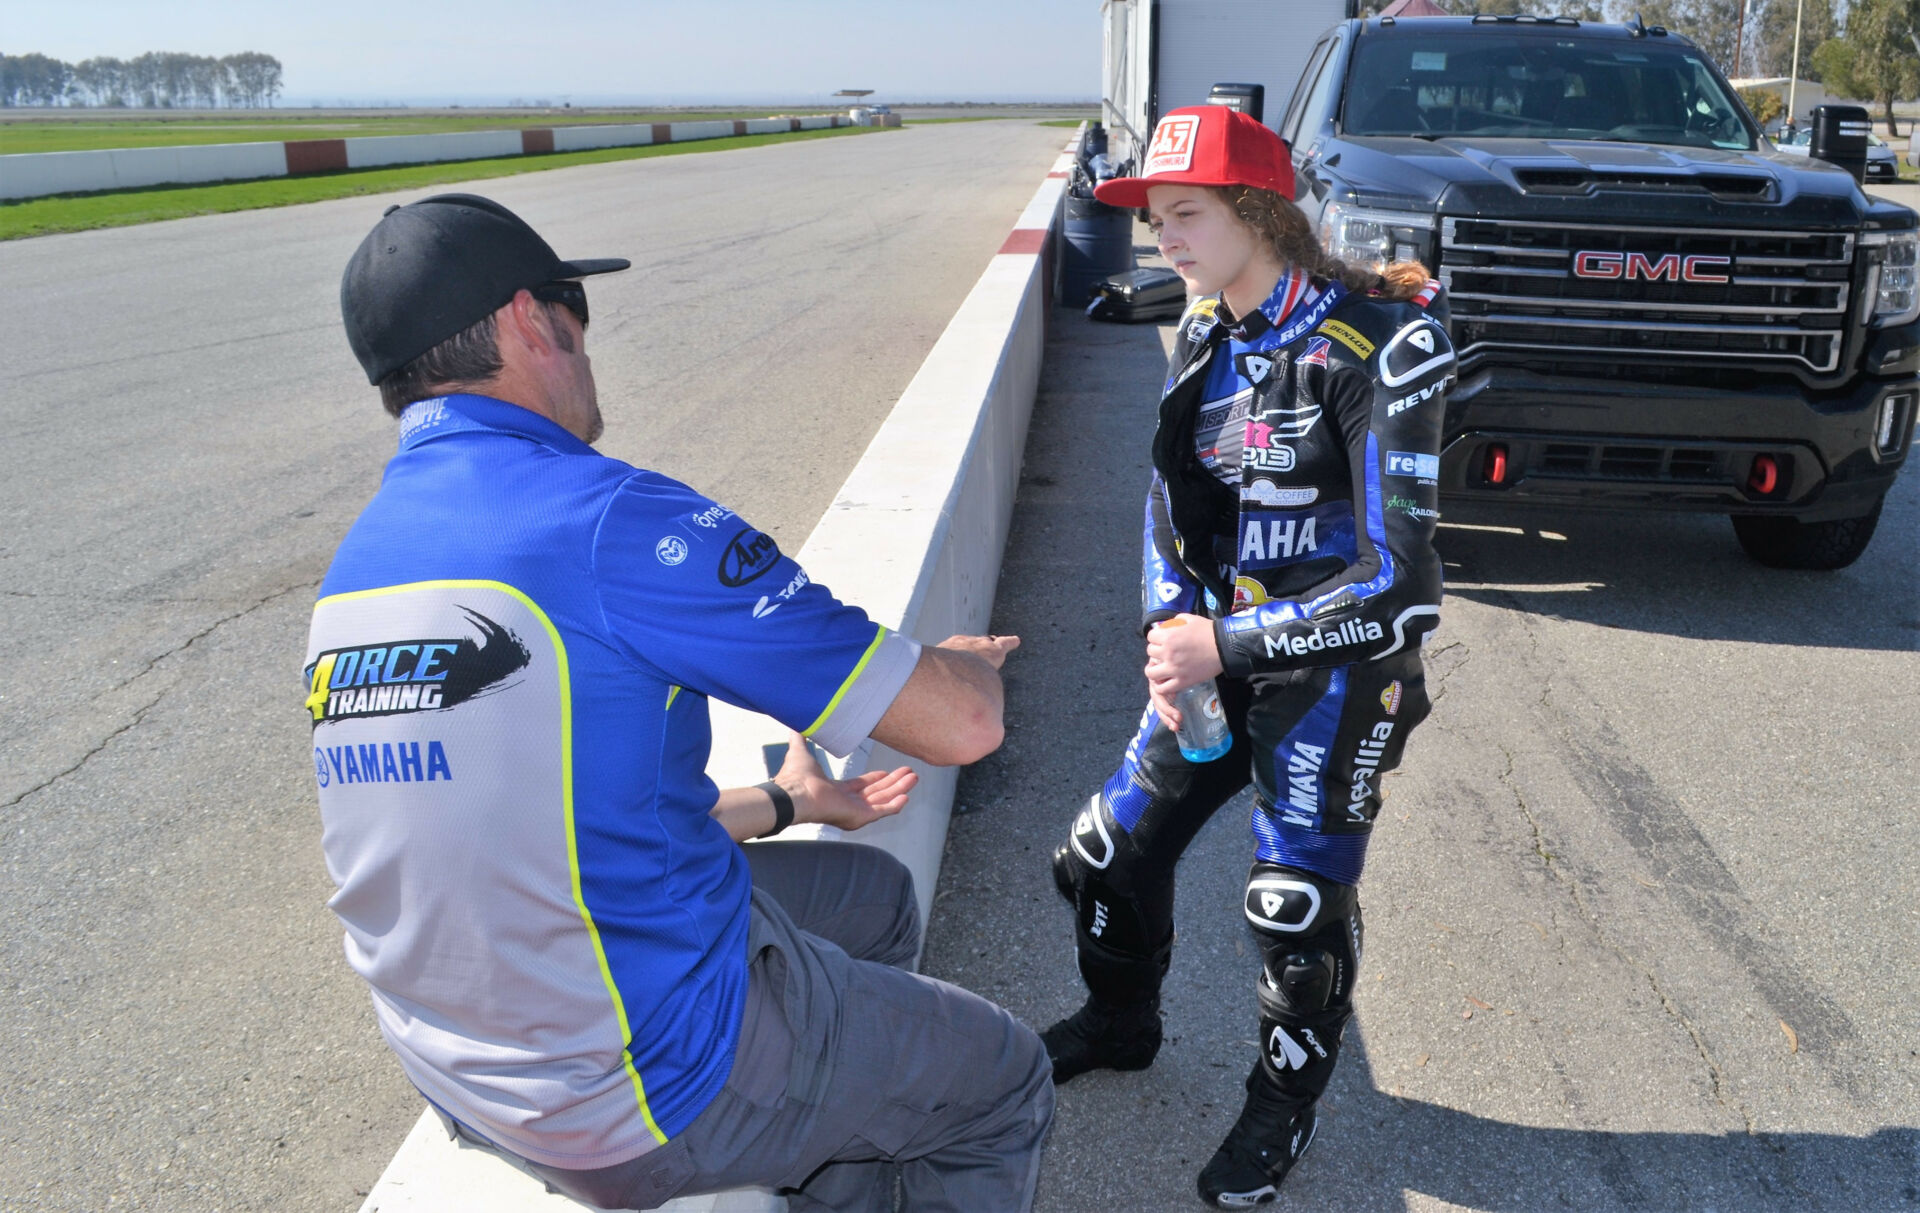 Four-time AMA Superbike Champion and rider coach Josh Hayes (left) works with MP13 Racing Yamaha MotoAmerica Twins Cup racer Kayla Yaakov during a test at Buttonwillow. Photo by David Swarts.